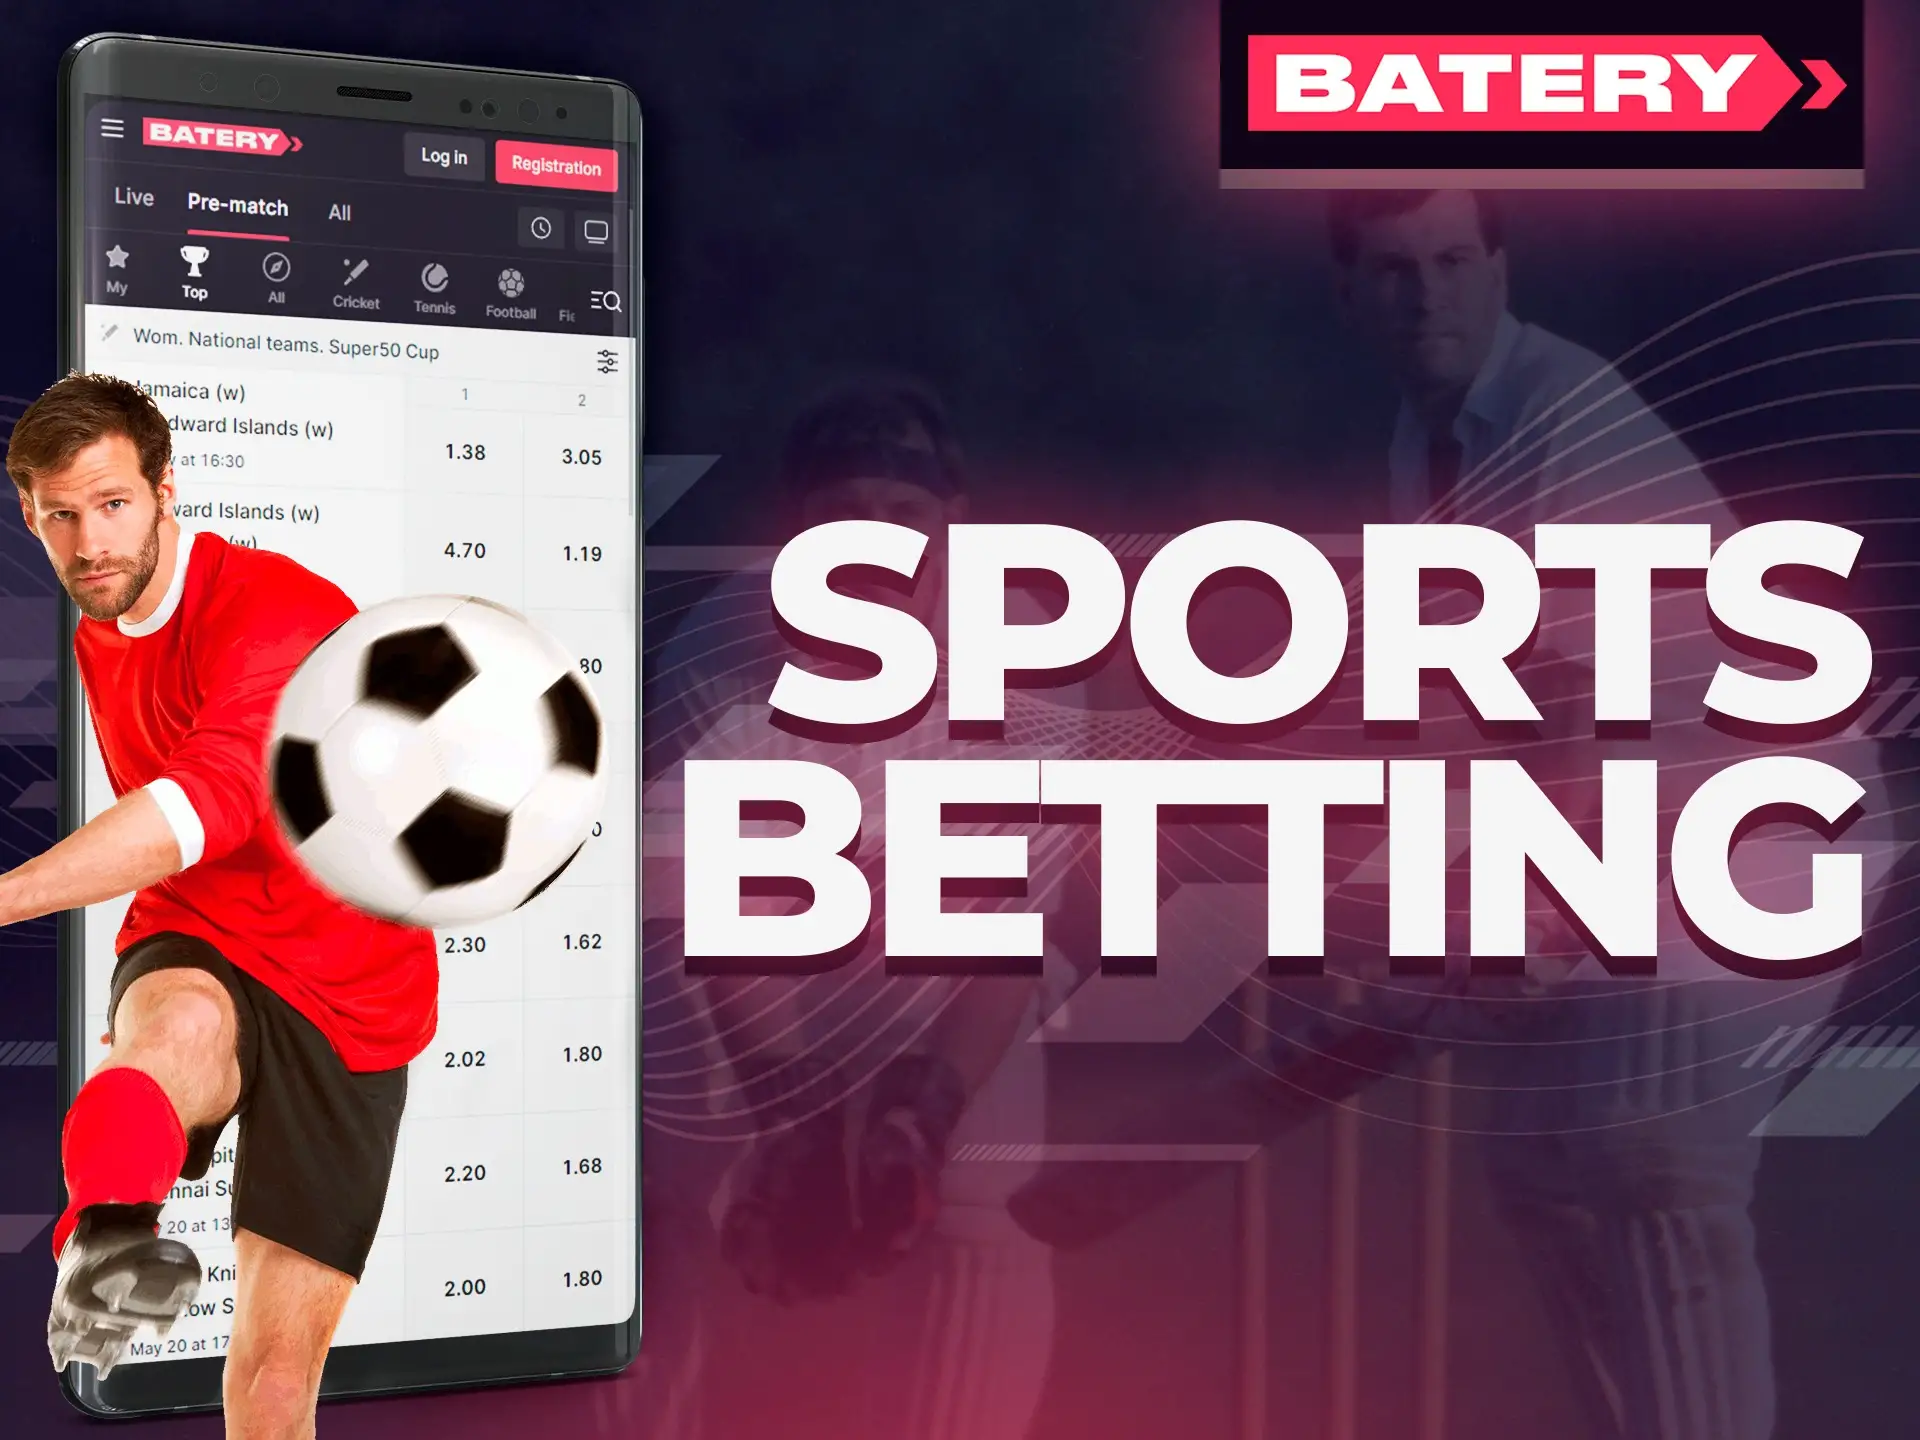 Bet on your favourite sports on Batery sports betting page.